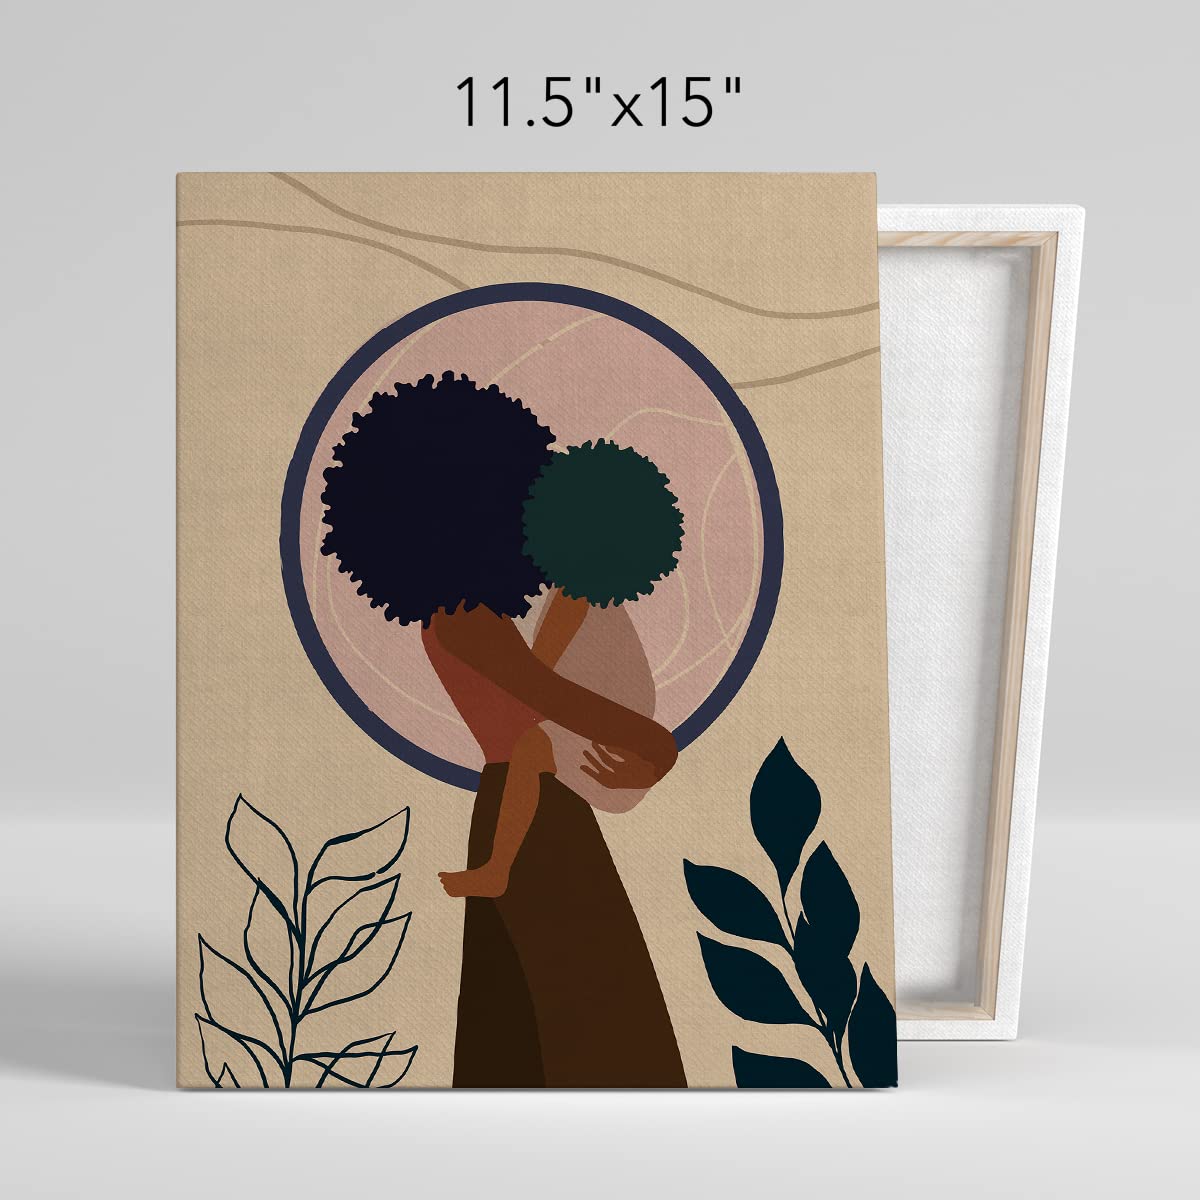 NISTOMISU African American Women Girl Canvas Prints Wall Decor Black Mother and Daughter Canvas Art Sign Canvas Poster Gifts for Home Bedroom Decor 11.5"x15"